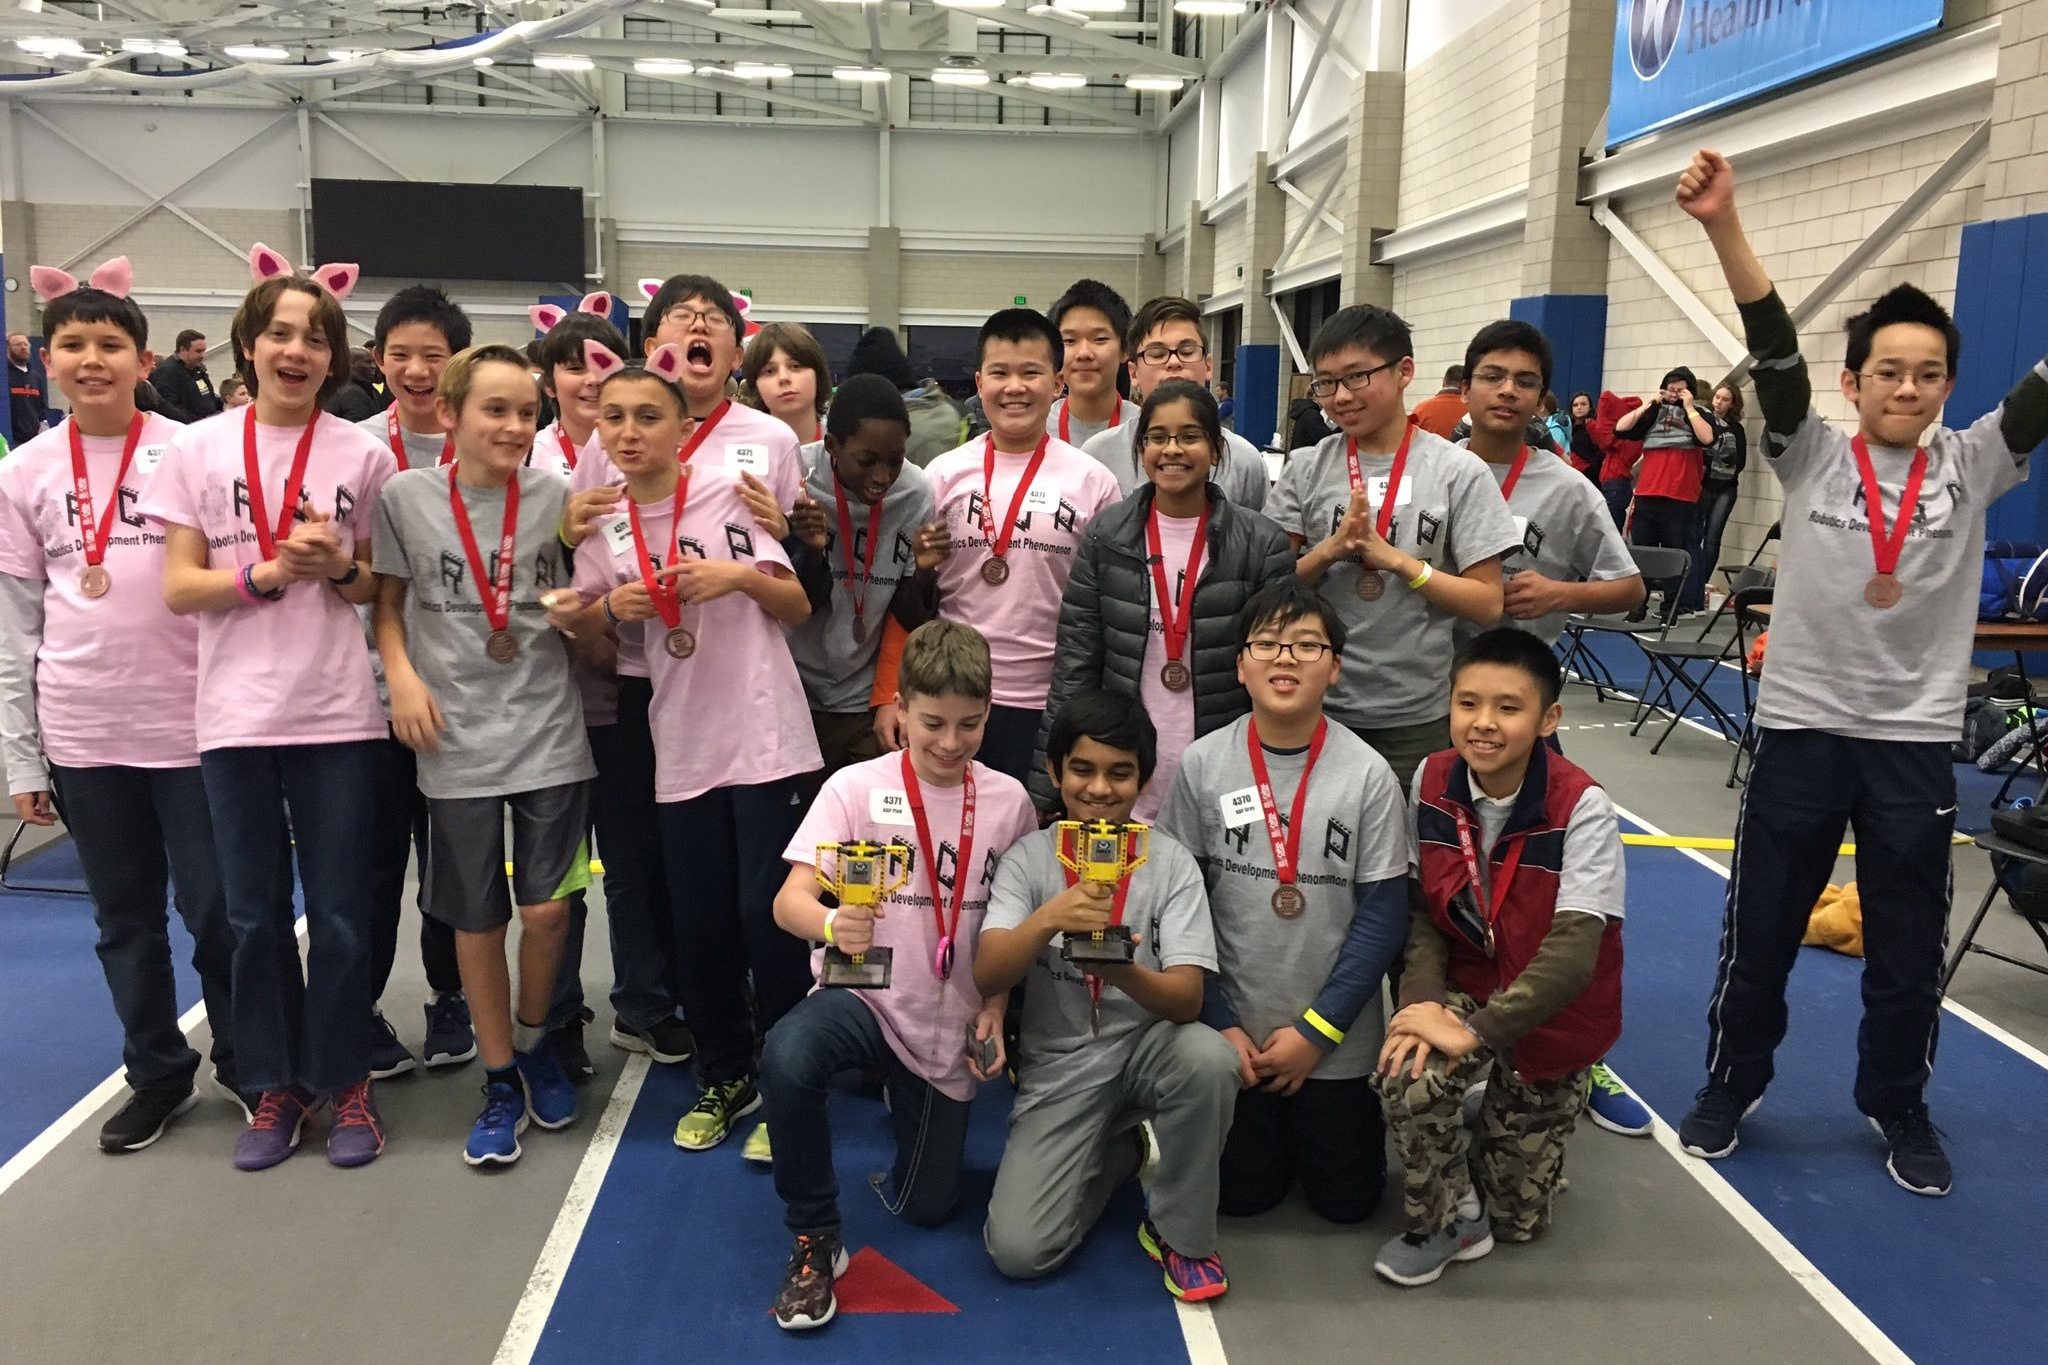 a group of happy students with medals and a trophy